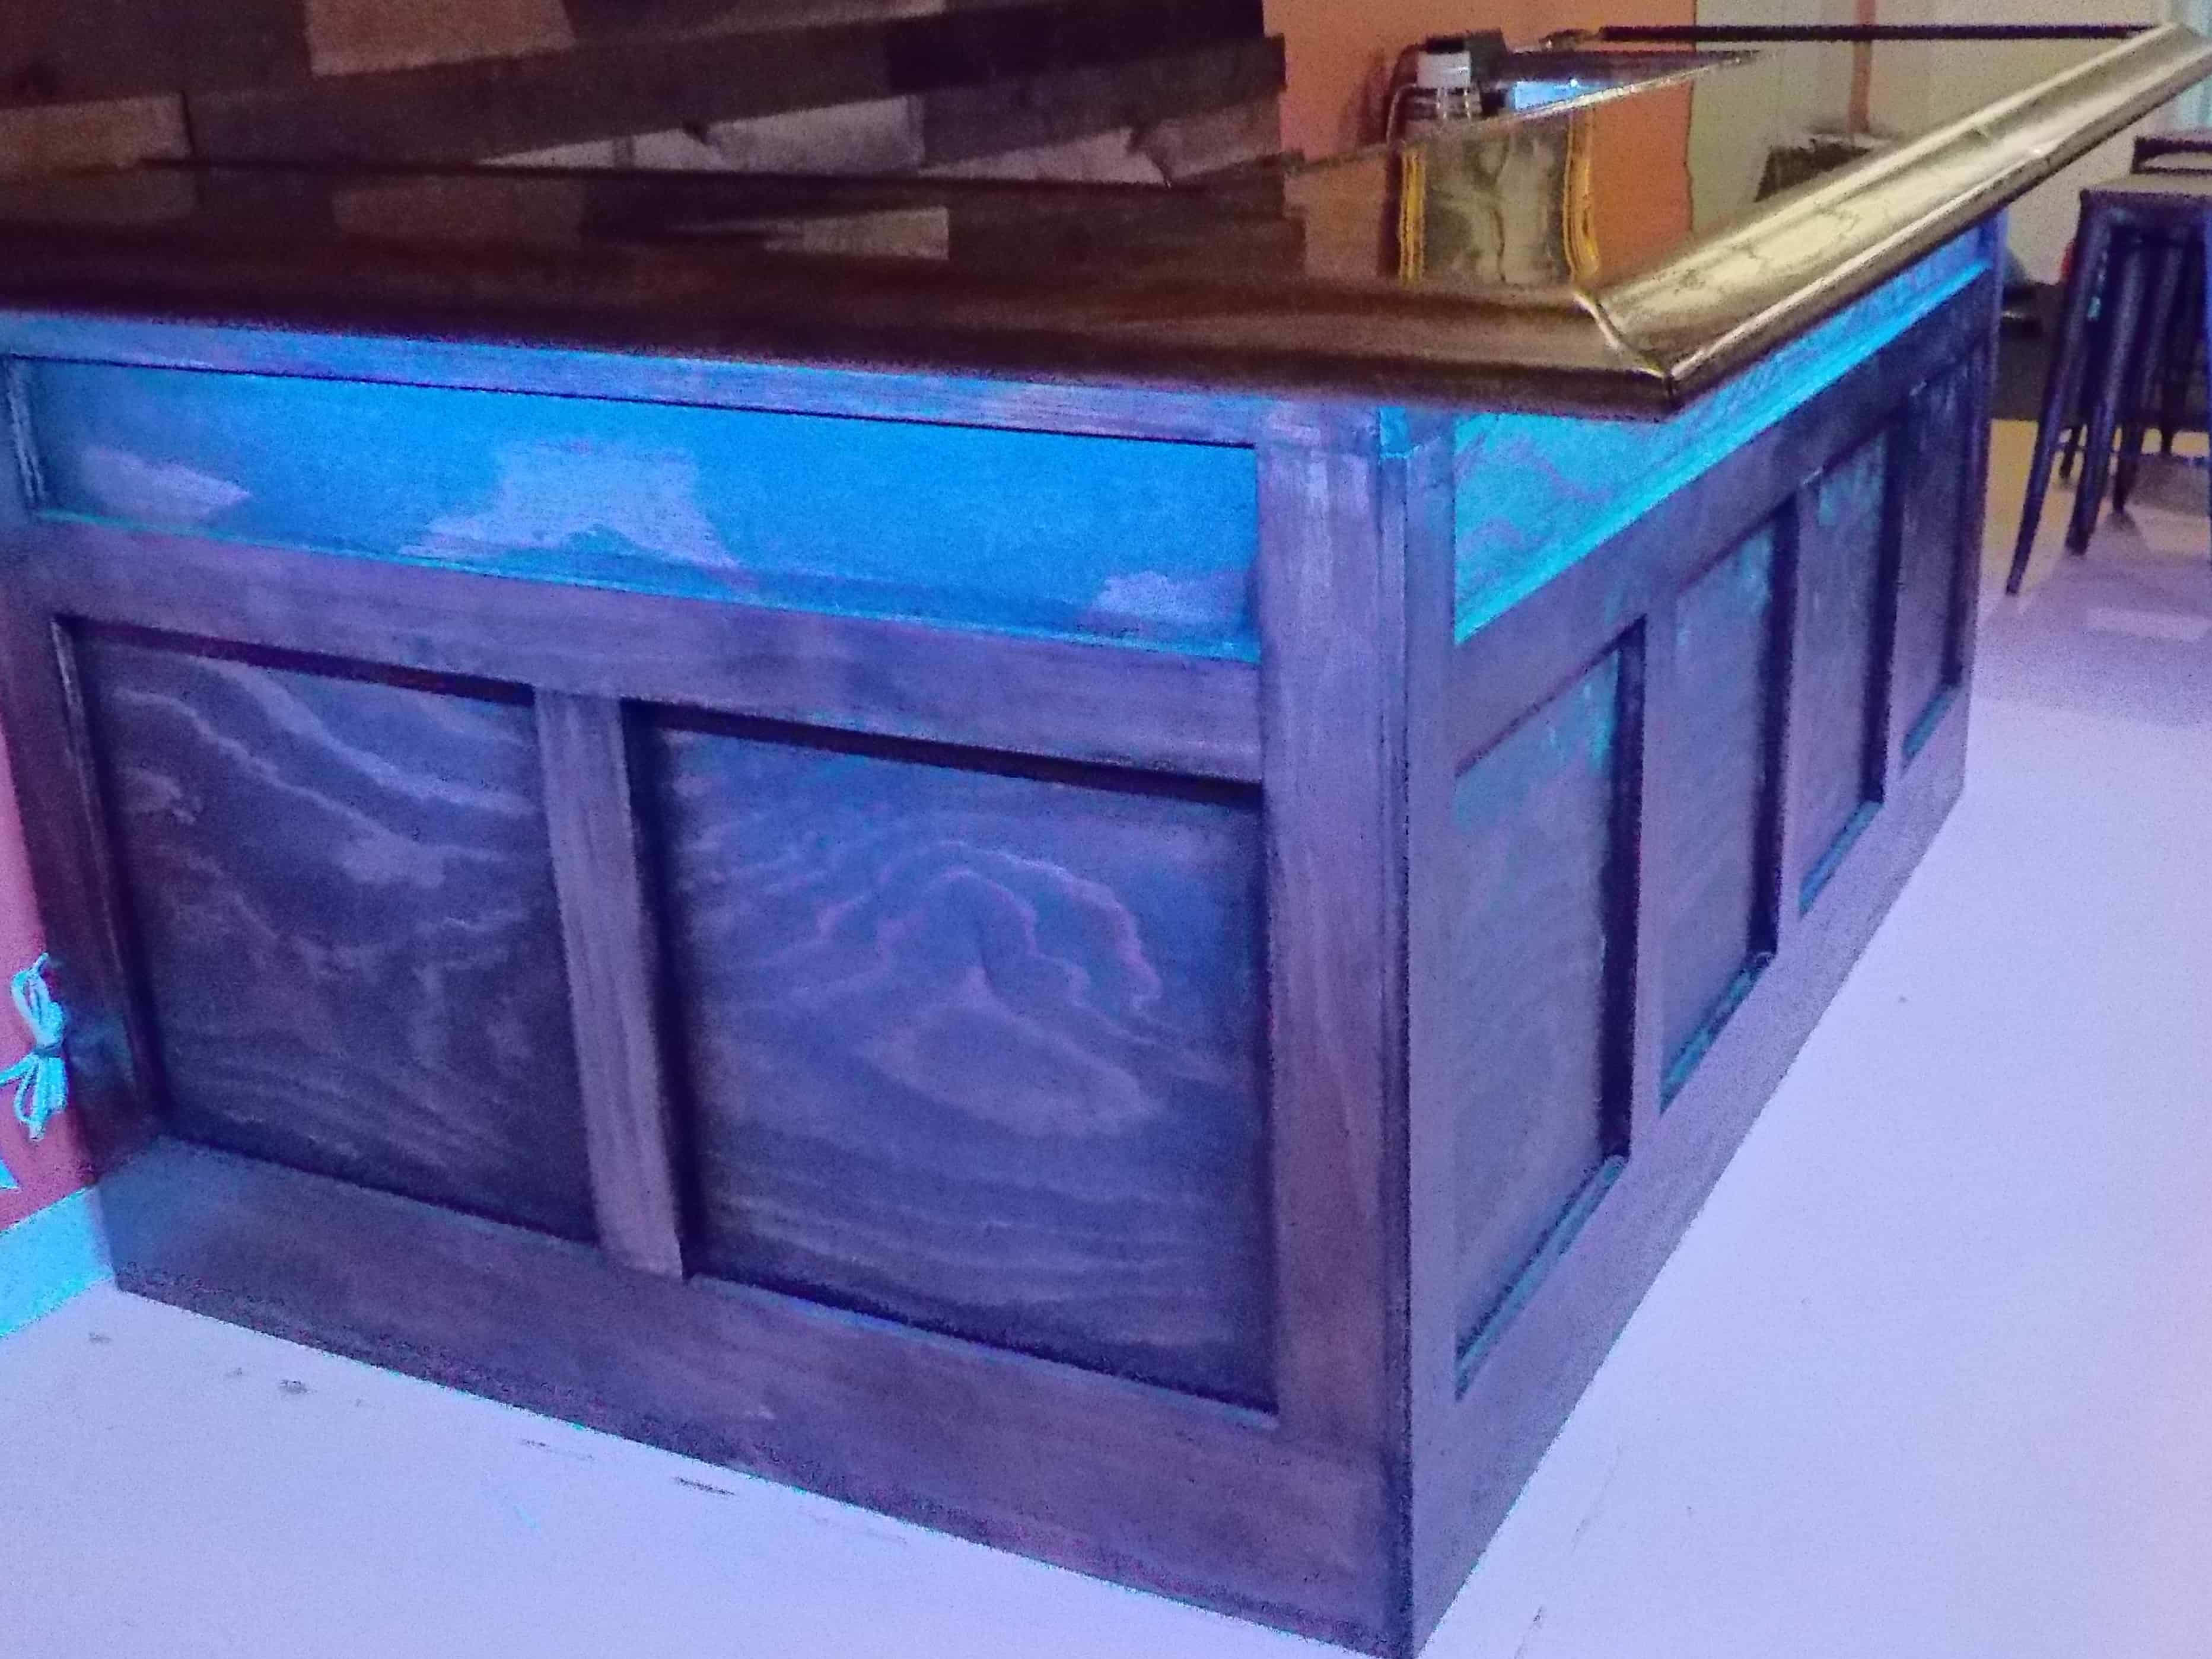 Home bar kit, 8 foot with 3 foot side, 2 level wooden bar top